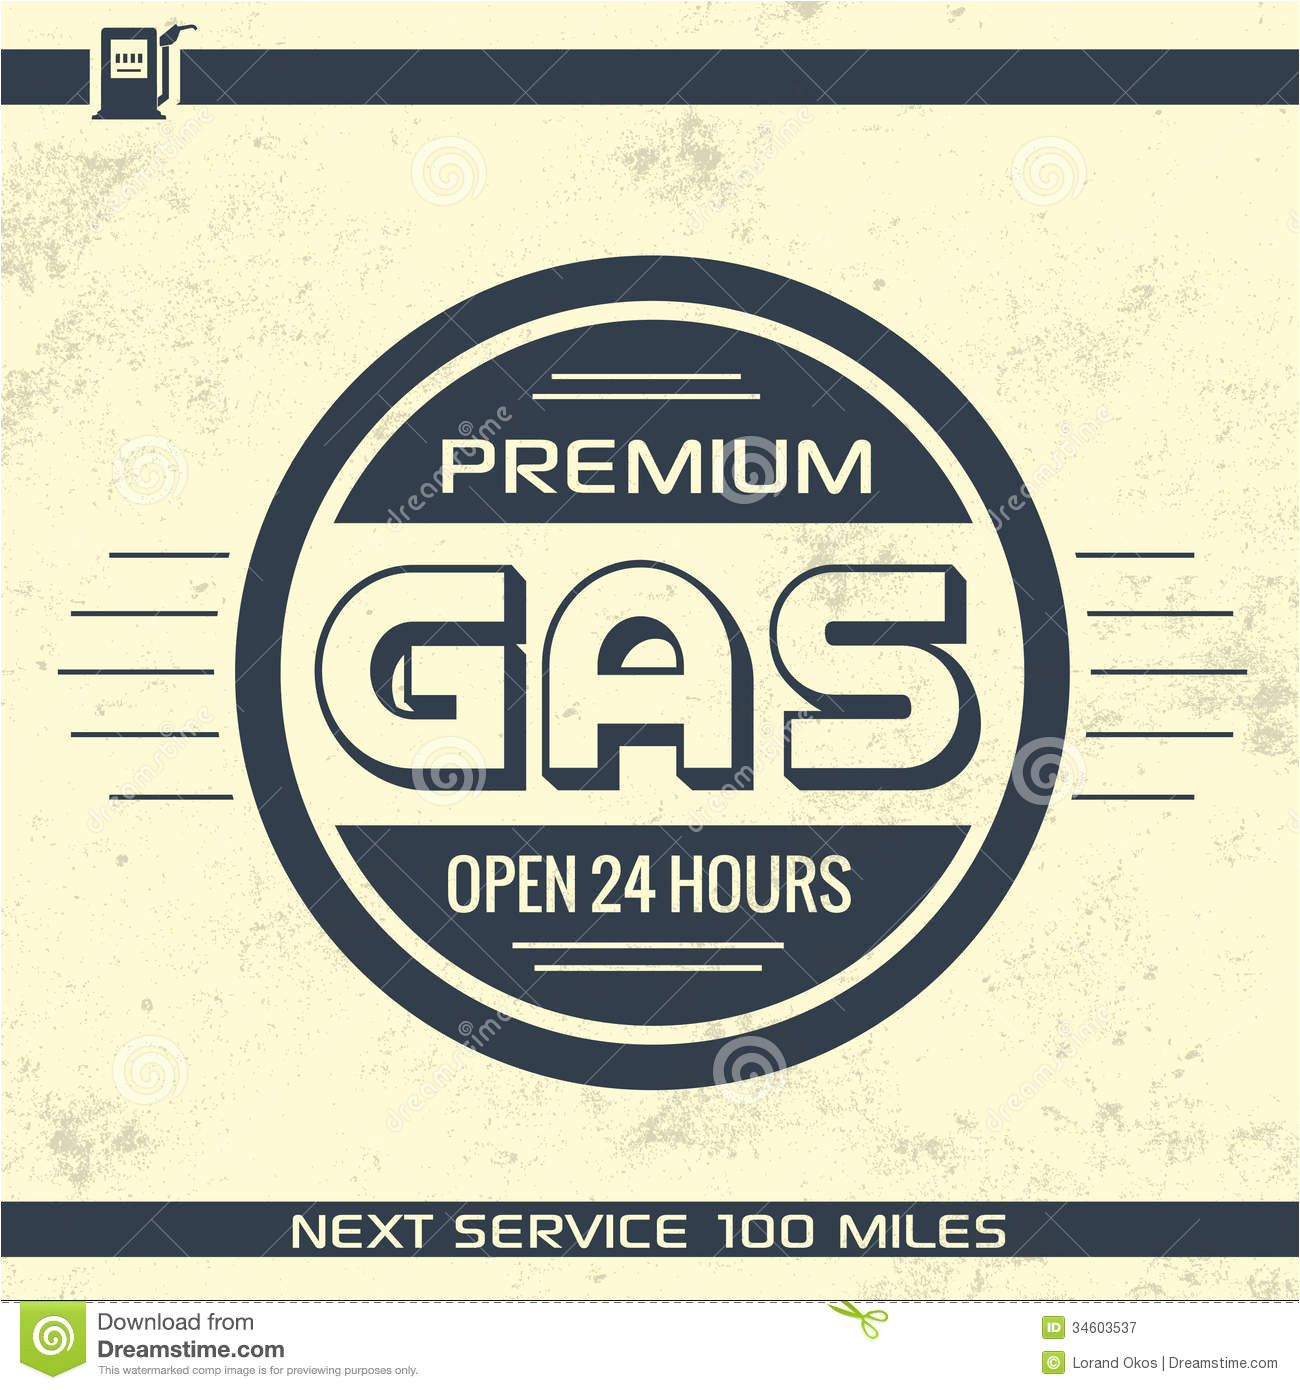 royalty free stock photography vintage gasoline sign retro template grunge texture image34603537